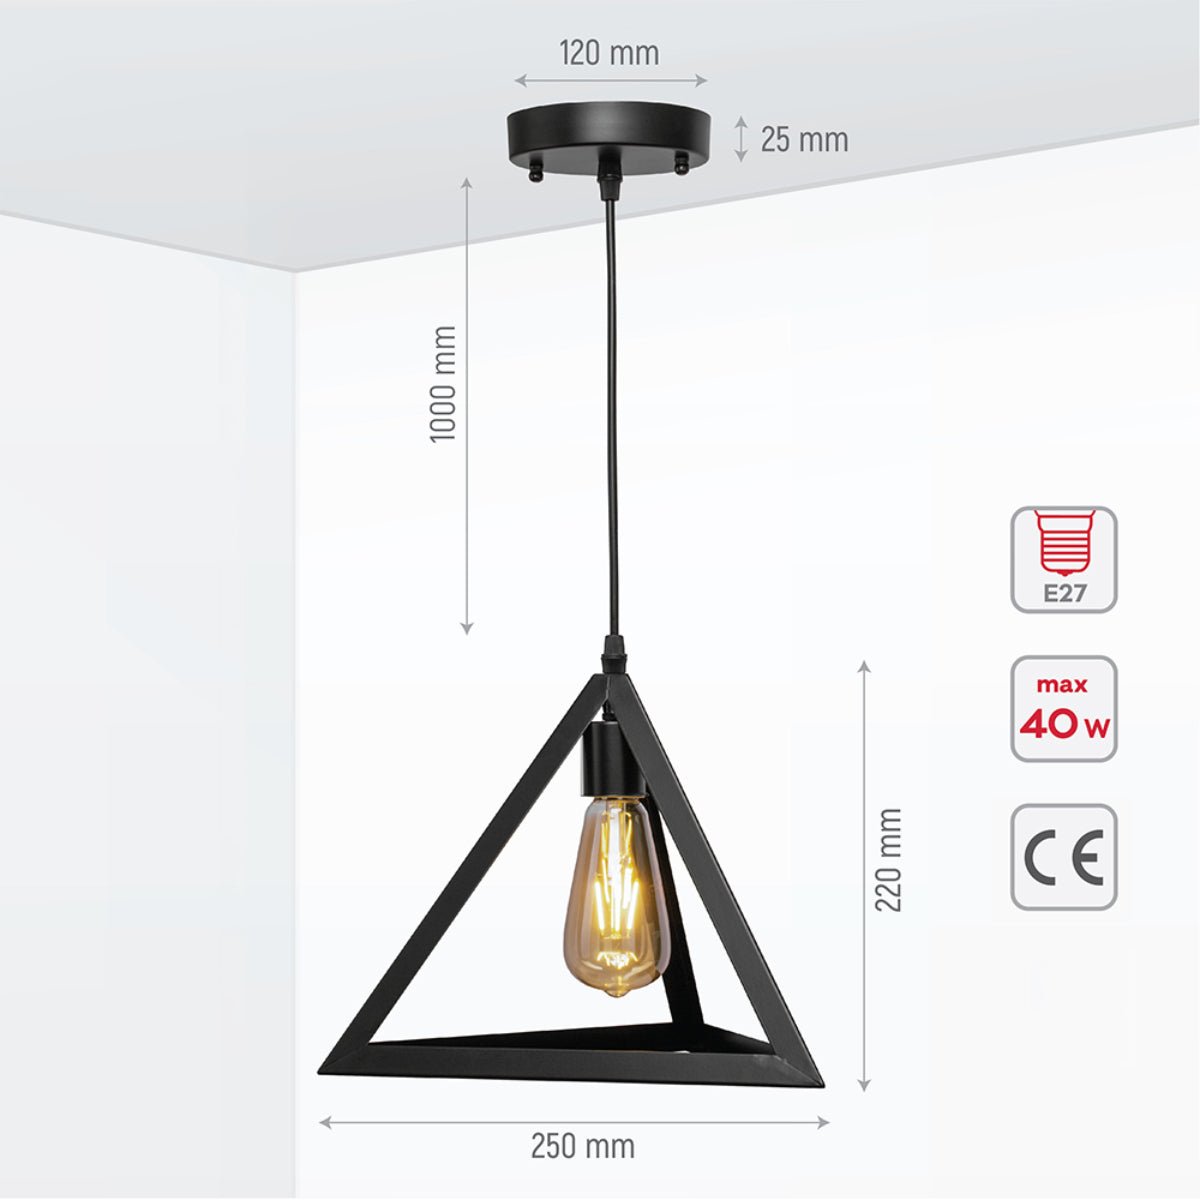 Size and specs of Black Metal Pyramid Cage Pendant Ceiling Light with E27 | TEKLED 150-17948